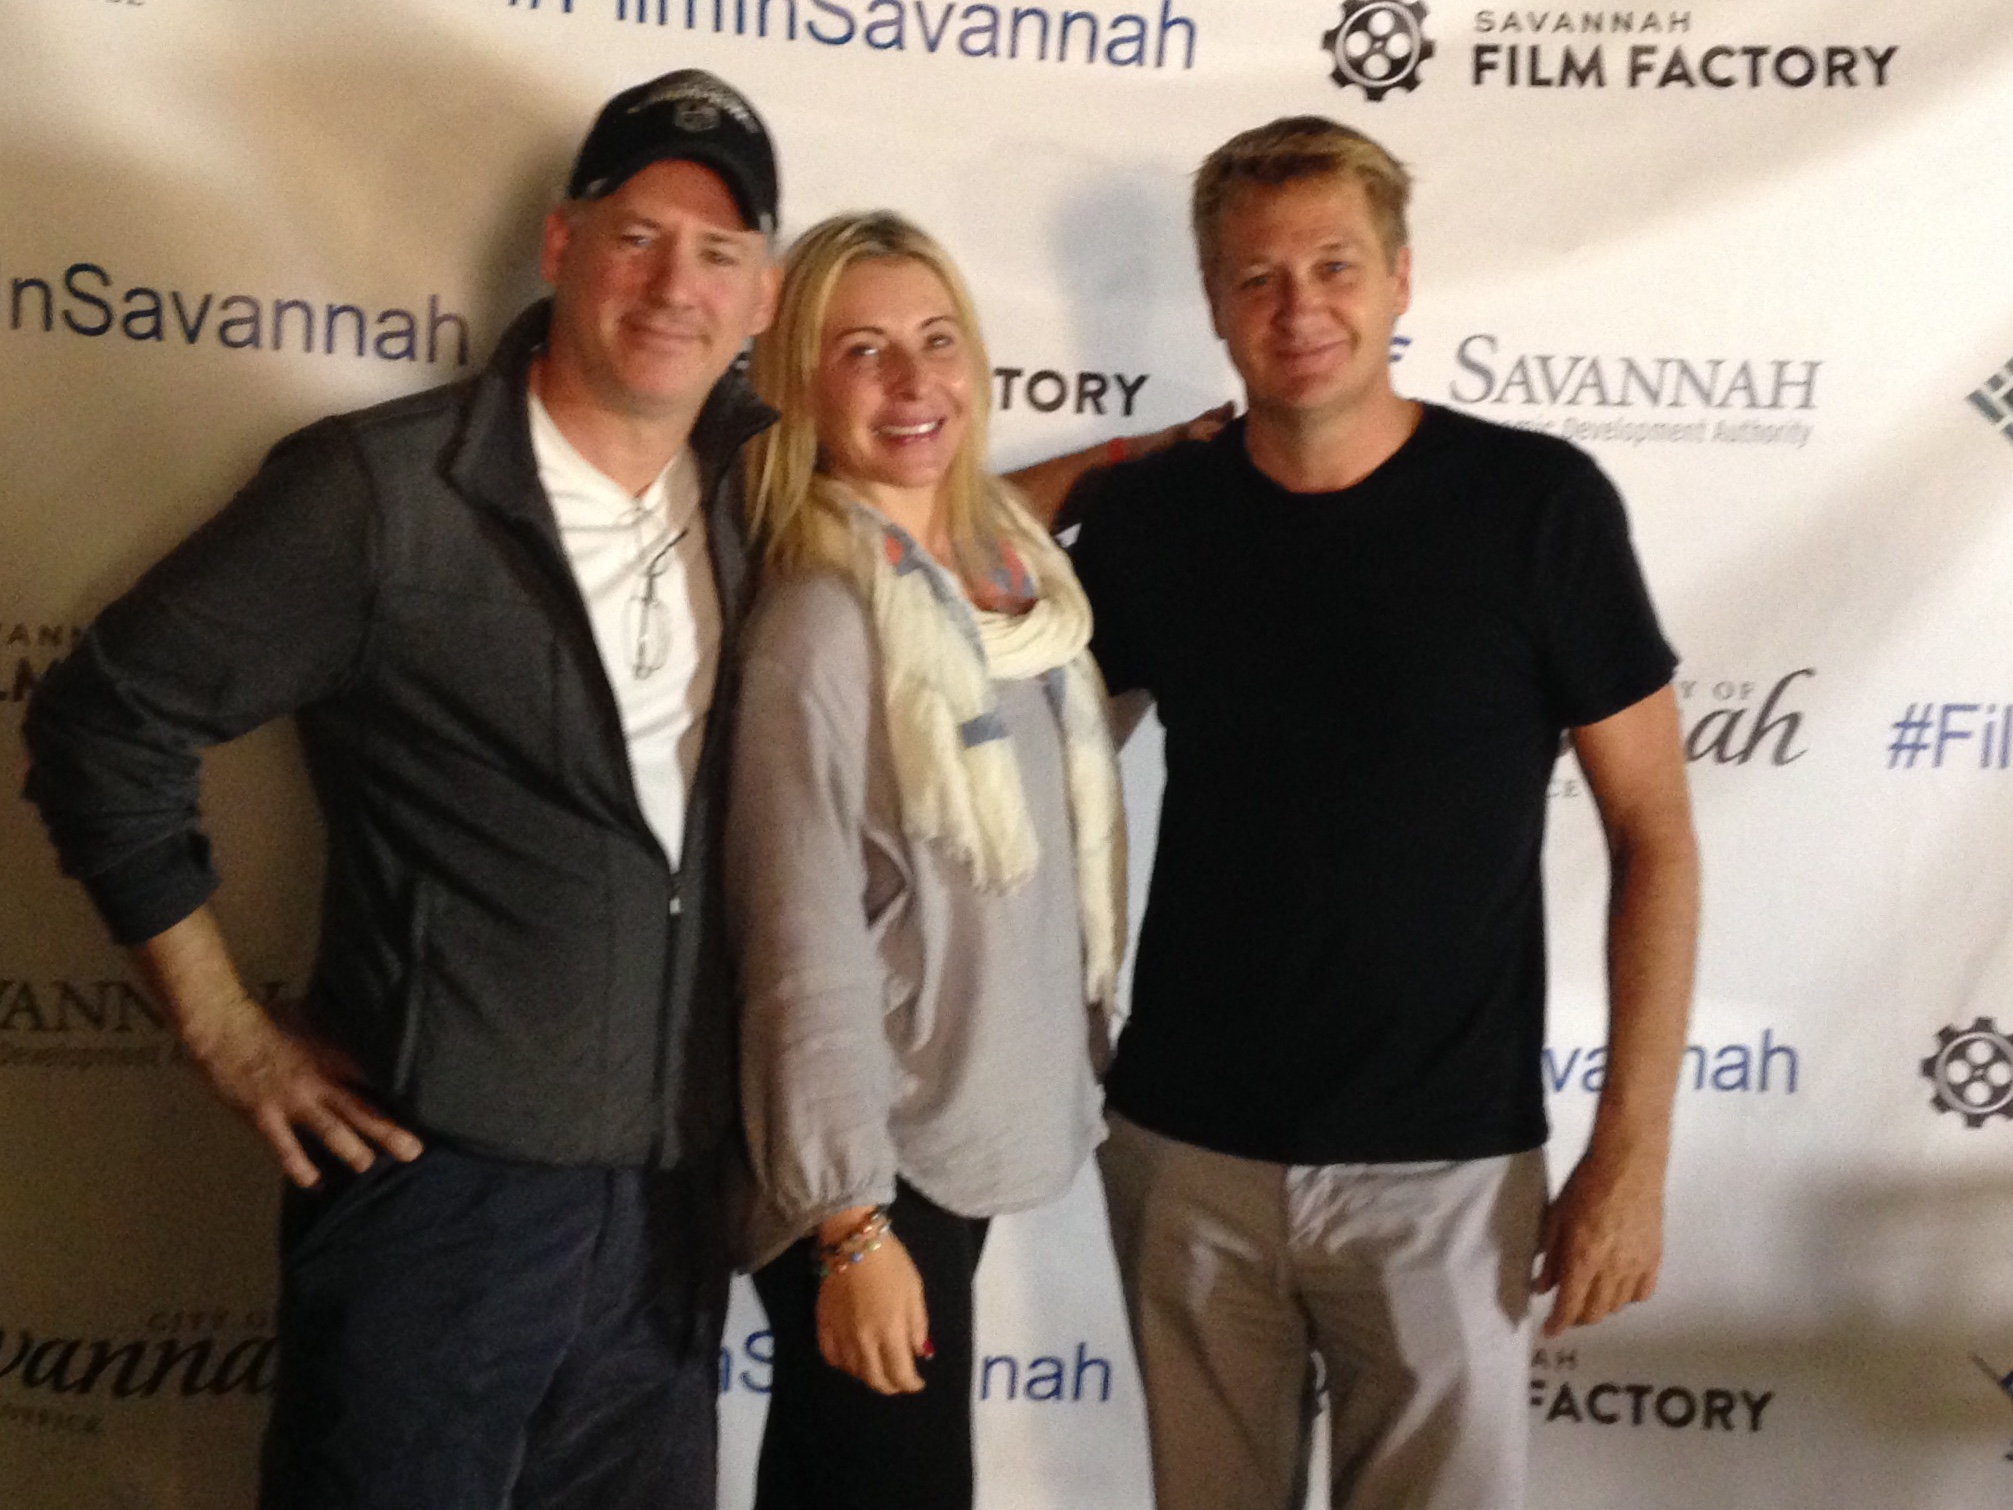 Mike Feifer , Liz Stirling & Skoti Collins at the Savannah Film Factory party.